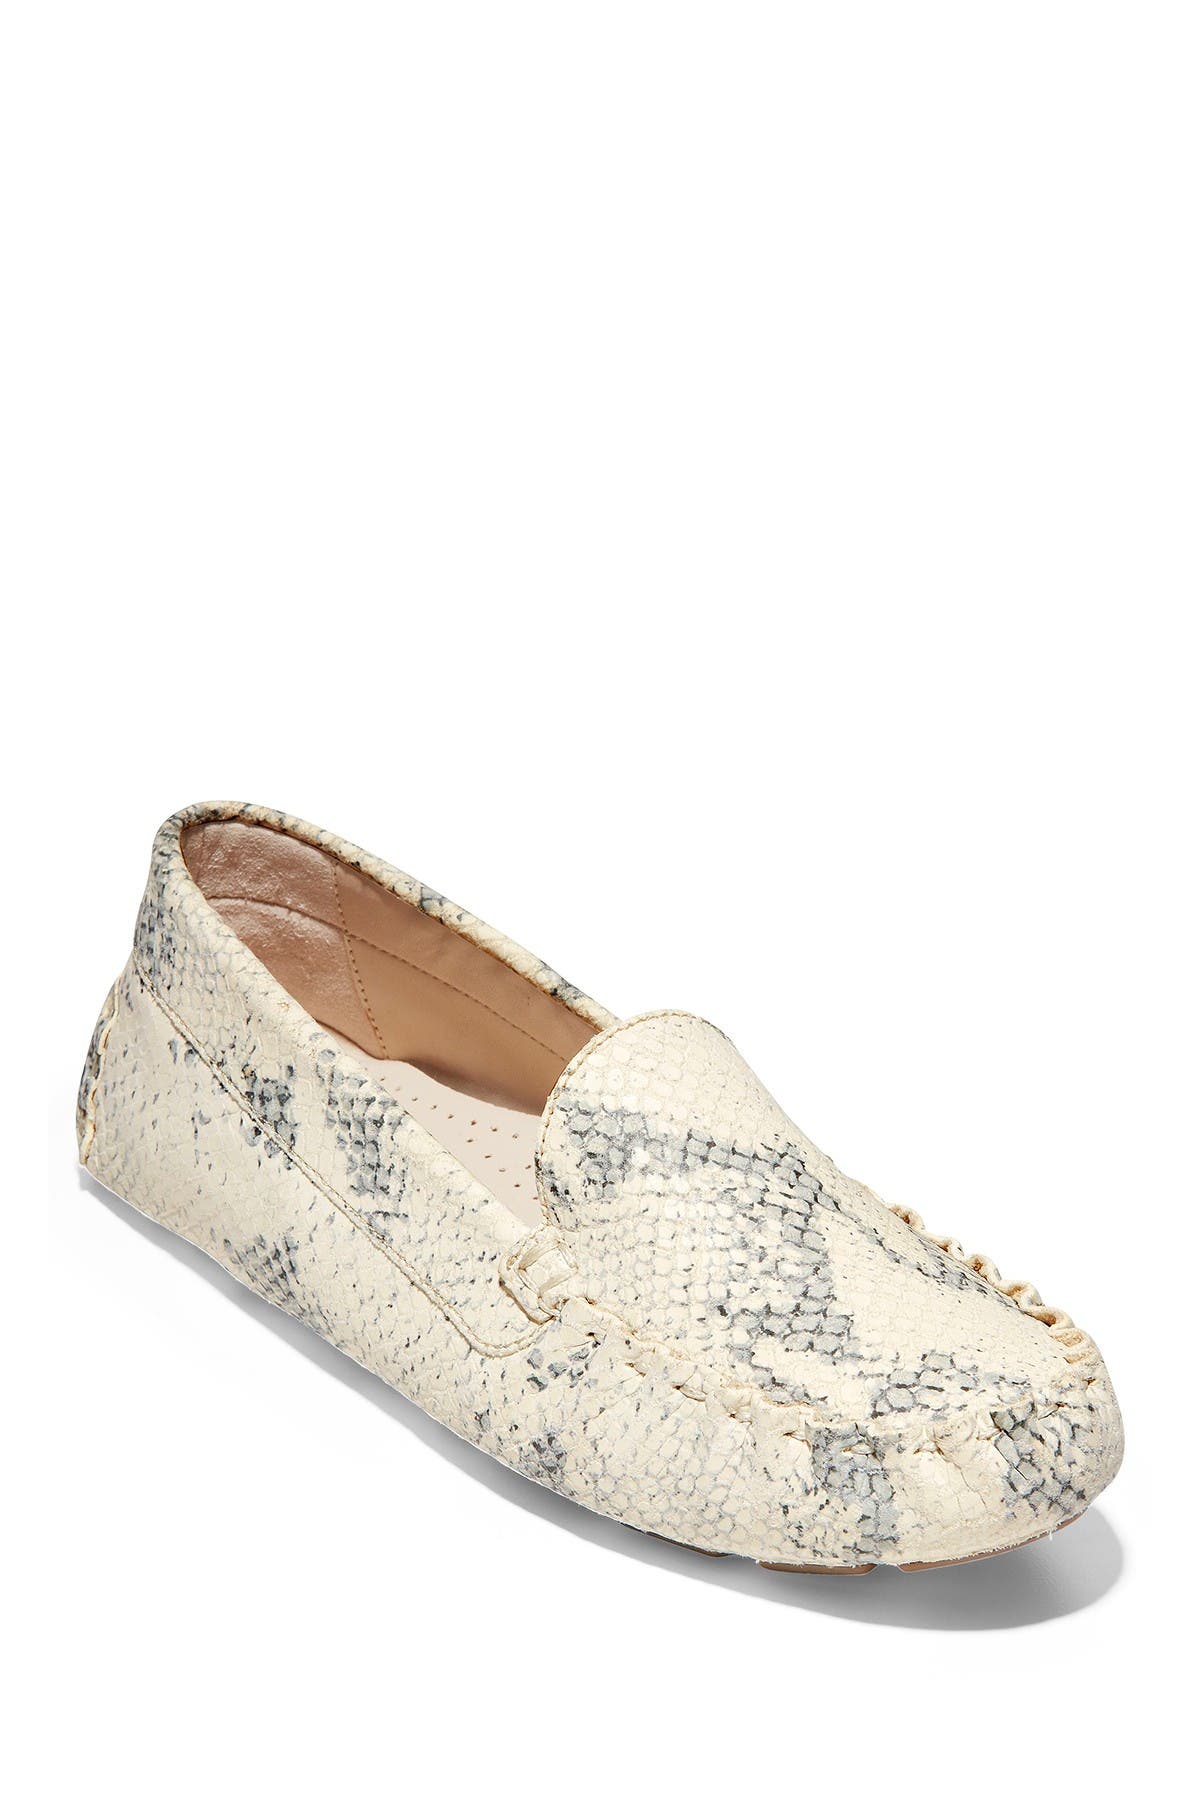 cole haan snakeskin loafers